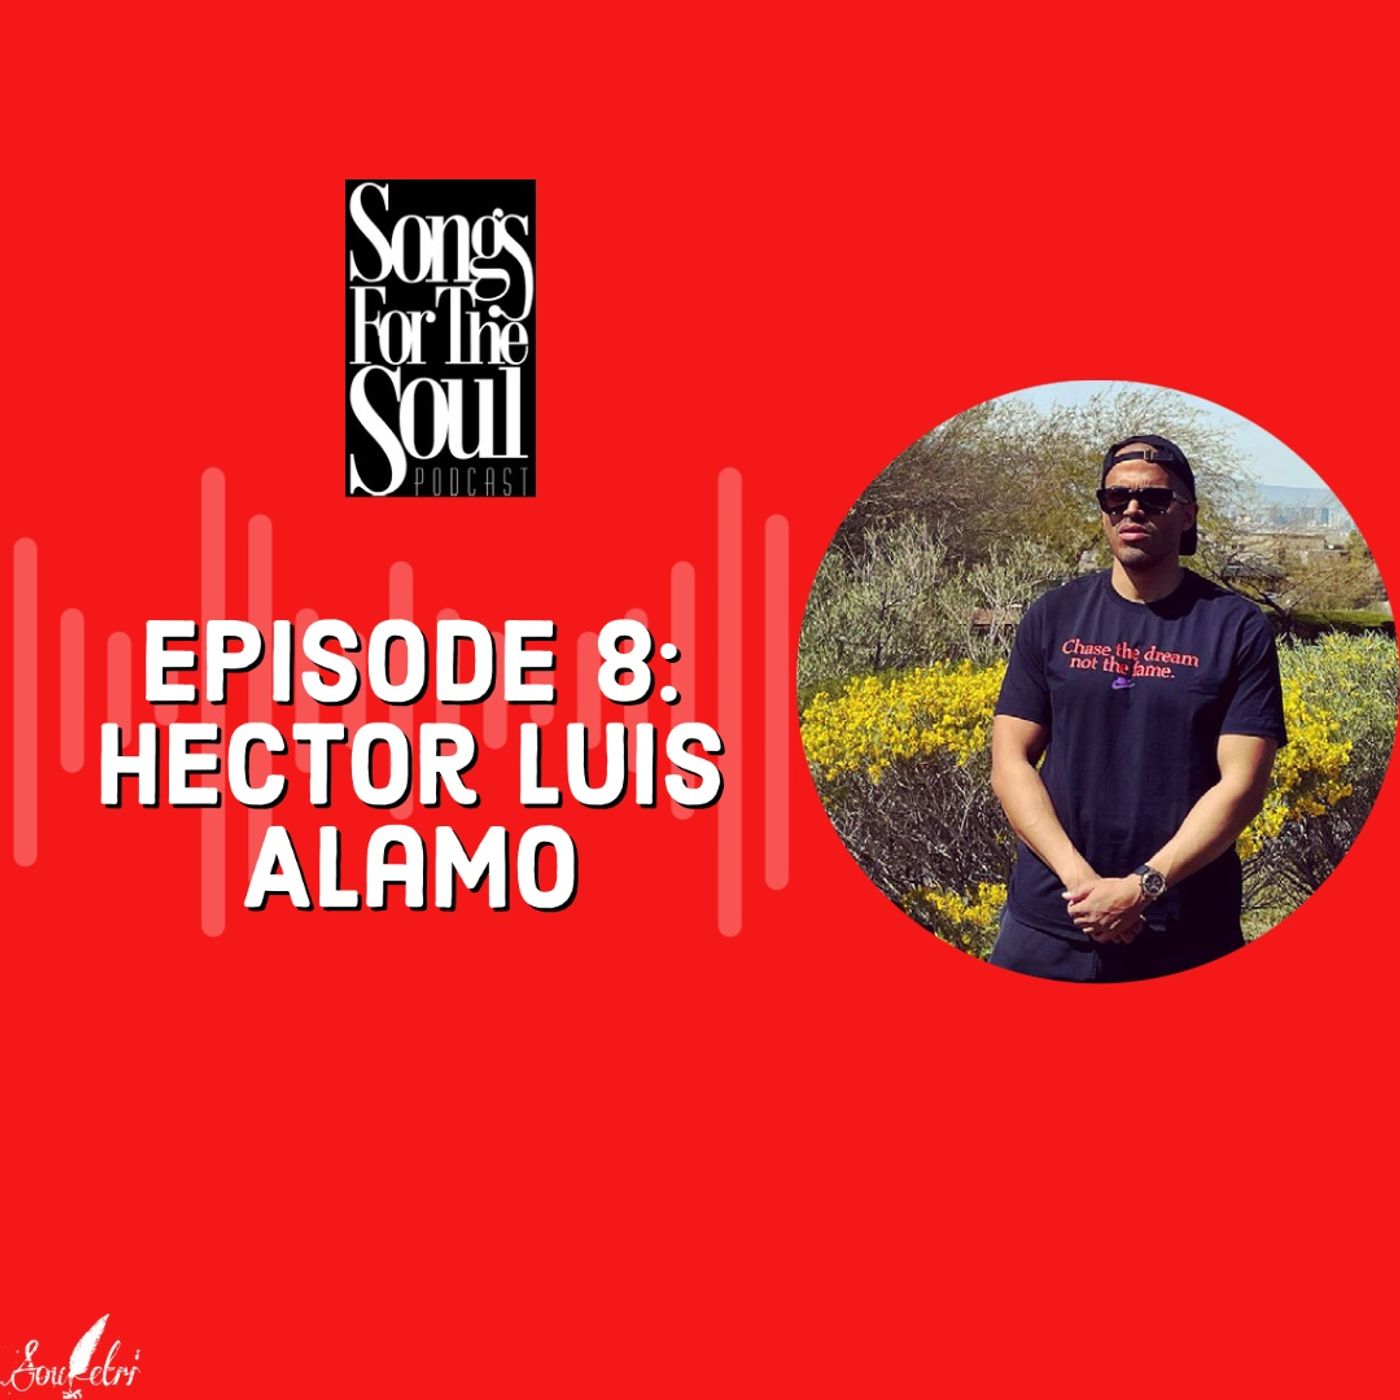 Songs for the Soul : Hector Luis Alamo